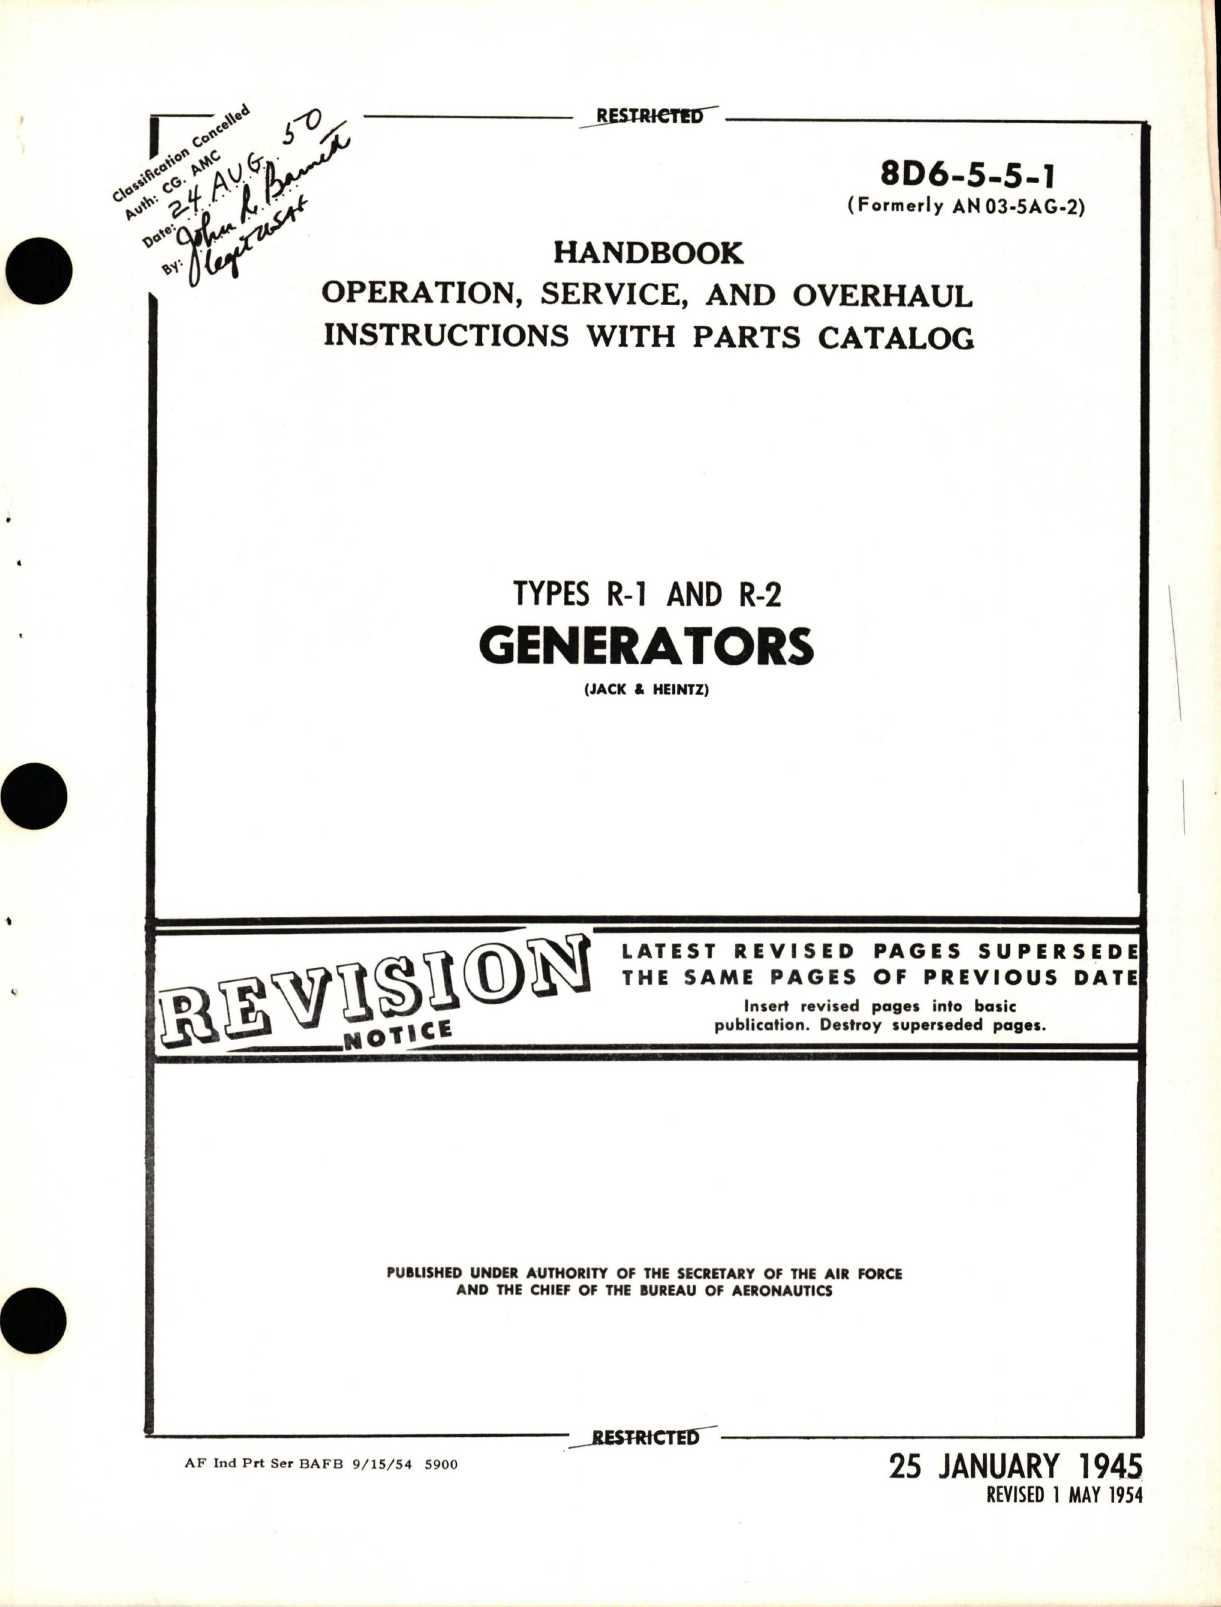 Sample page 1 from AirCorps Library document: Operation, Service and Overhaul Instructions with Parts Catalog for Generators - Types R-1 & R-2